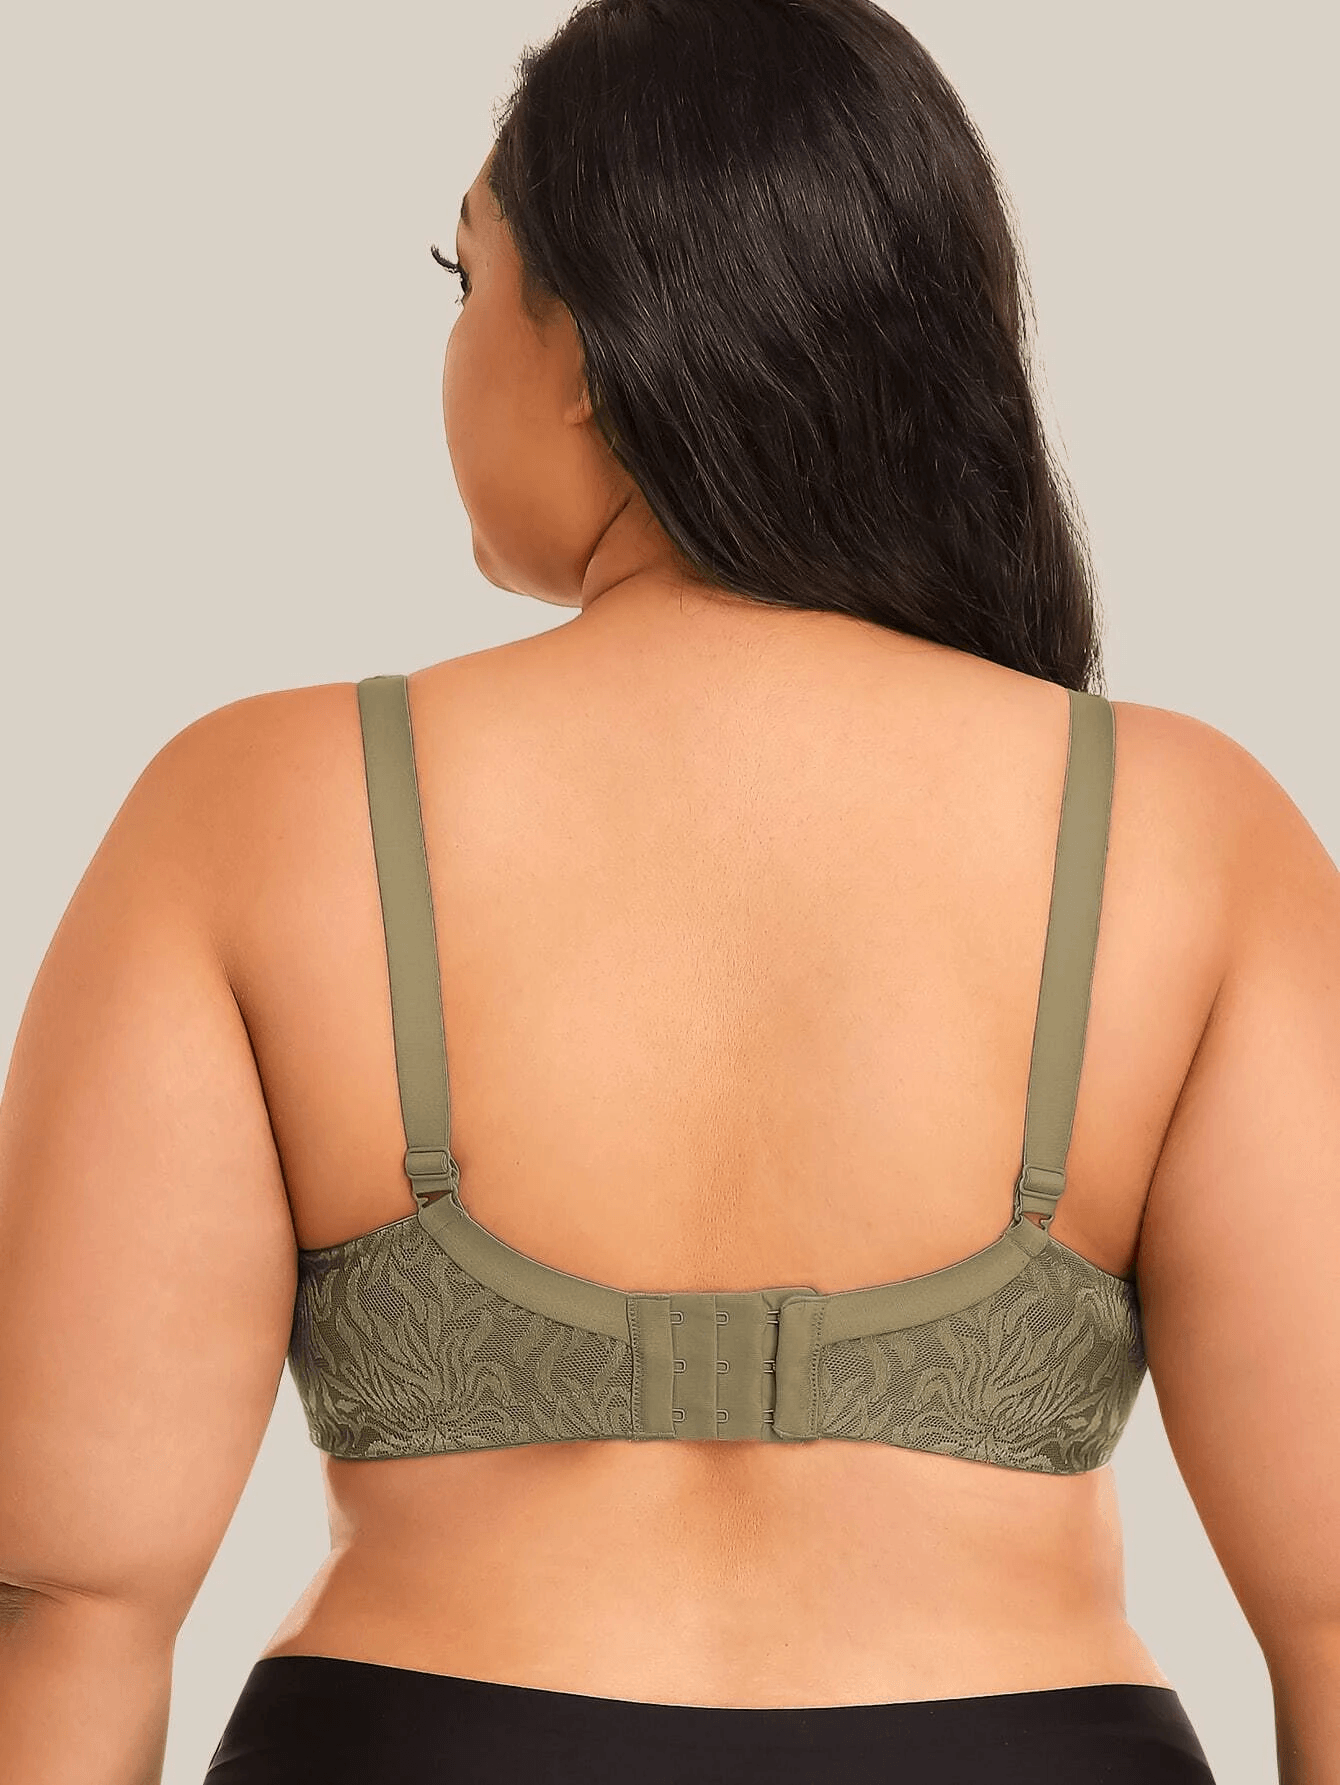 Wingloves Women's Full Coverage Bra Lace Underwire Minimizer Bra Support  Plus Size Front Closure Bras,Nude-42G 